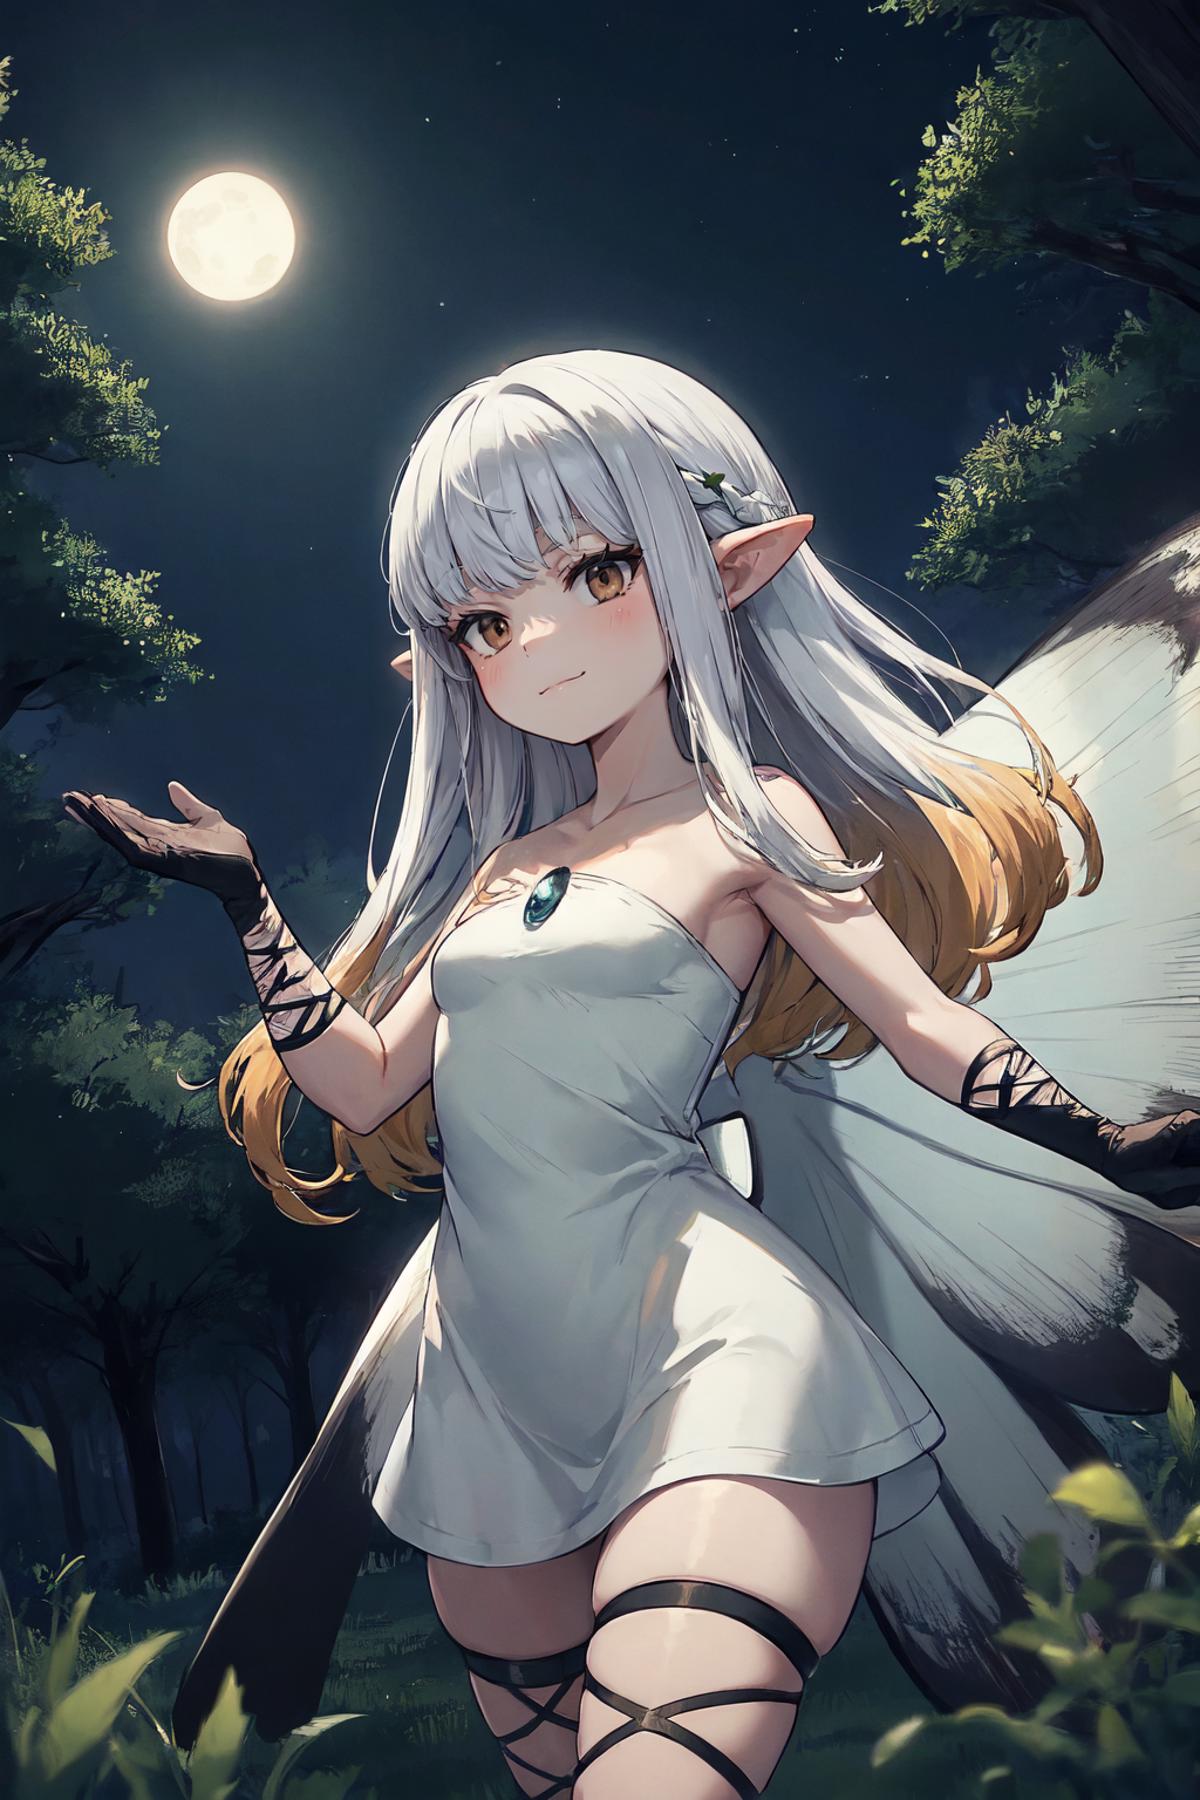 A cartoon illustration of a girl with white hair and a dress, standing in the woods.